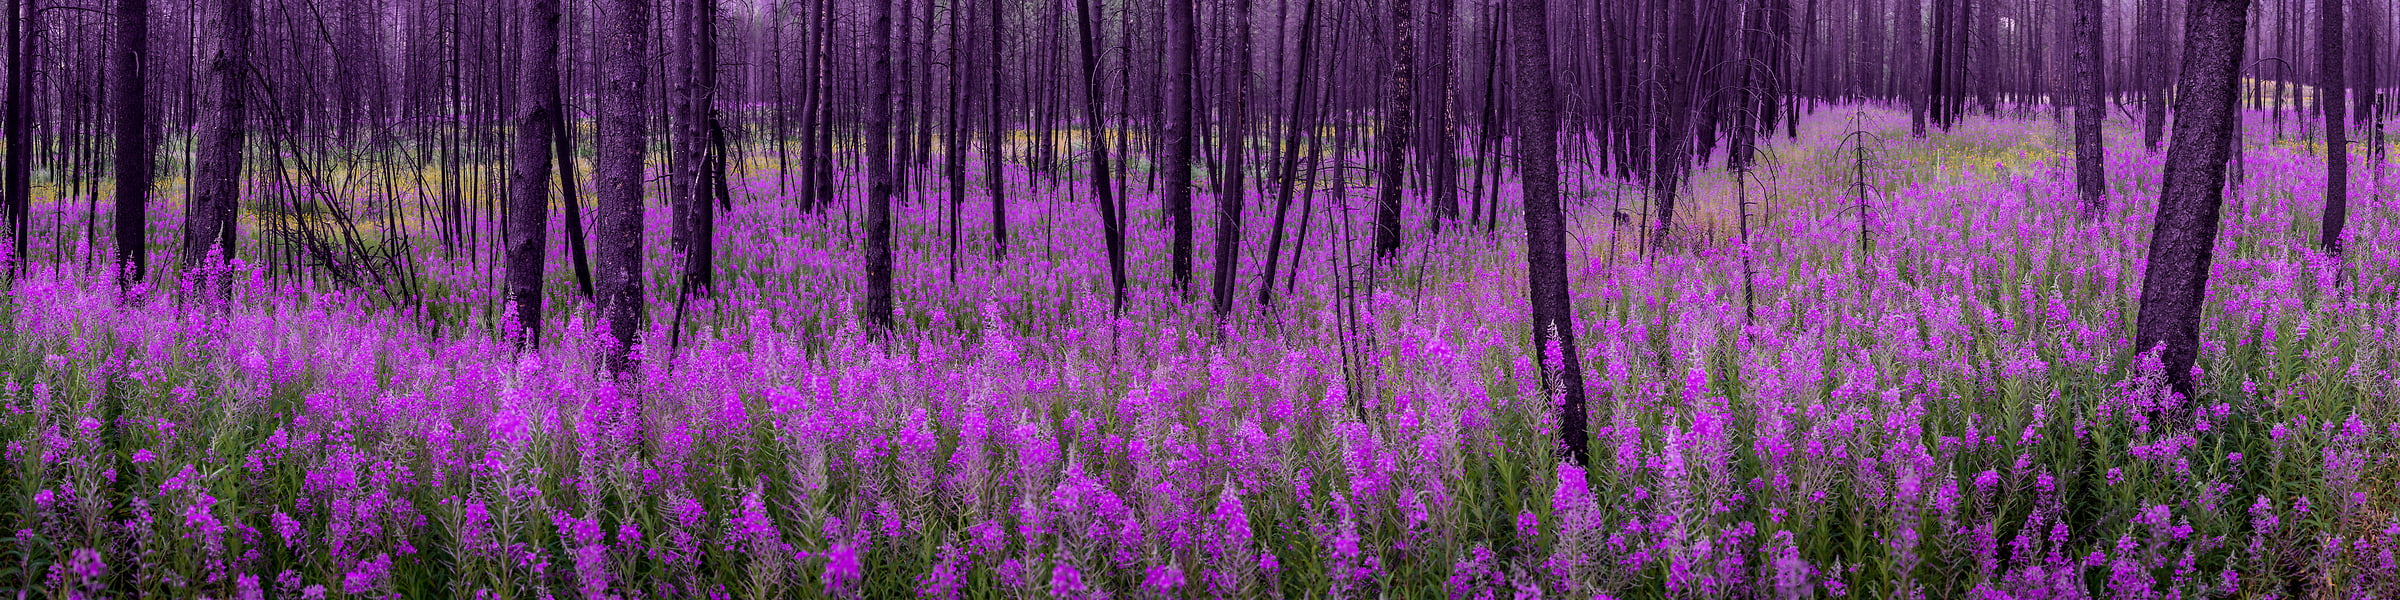 245 megapixels! A very high resolution, large-format VAST photo print of wildflowers in a forest; nature photograph created by Tim Shields in Rock Creek Provincial park, British Columbia, Canada.